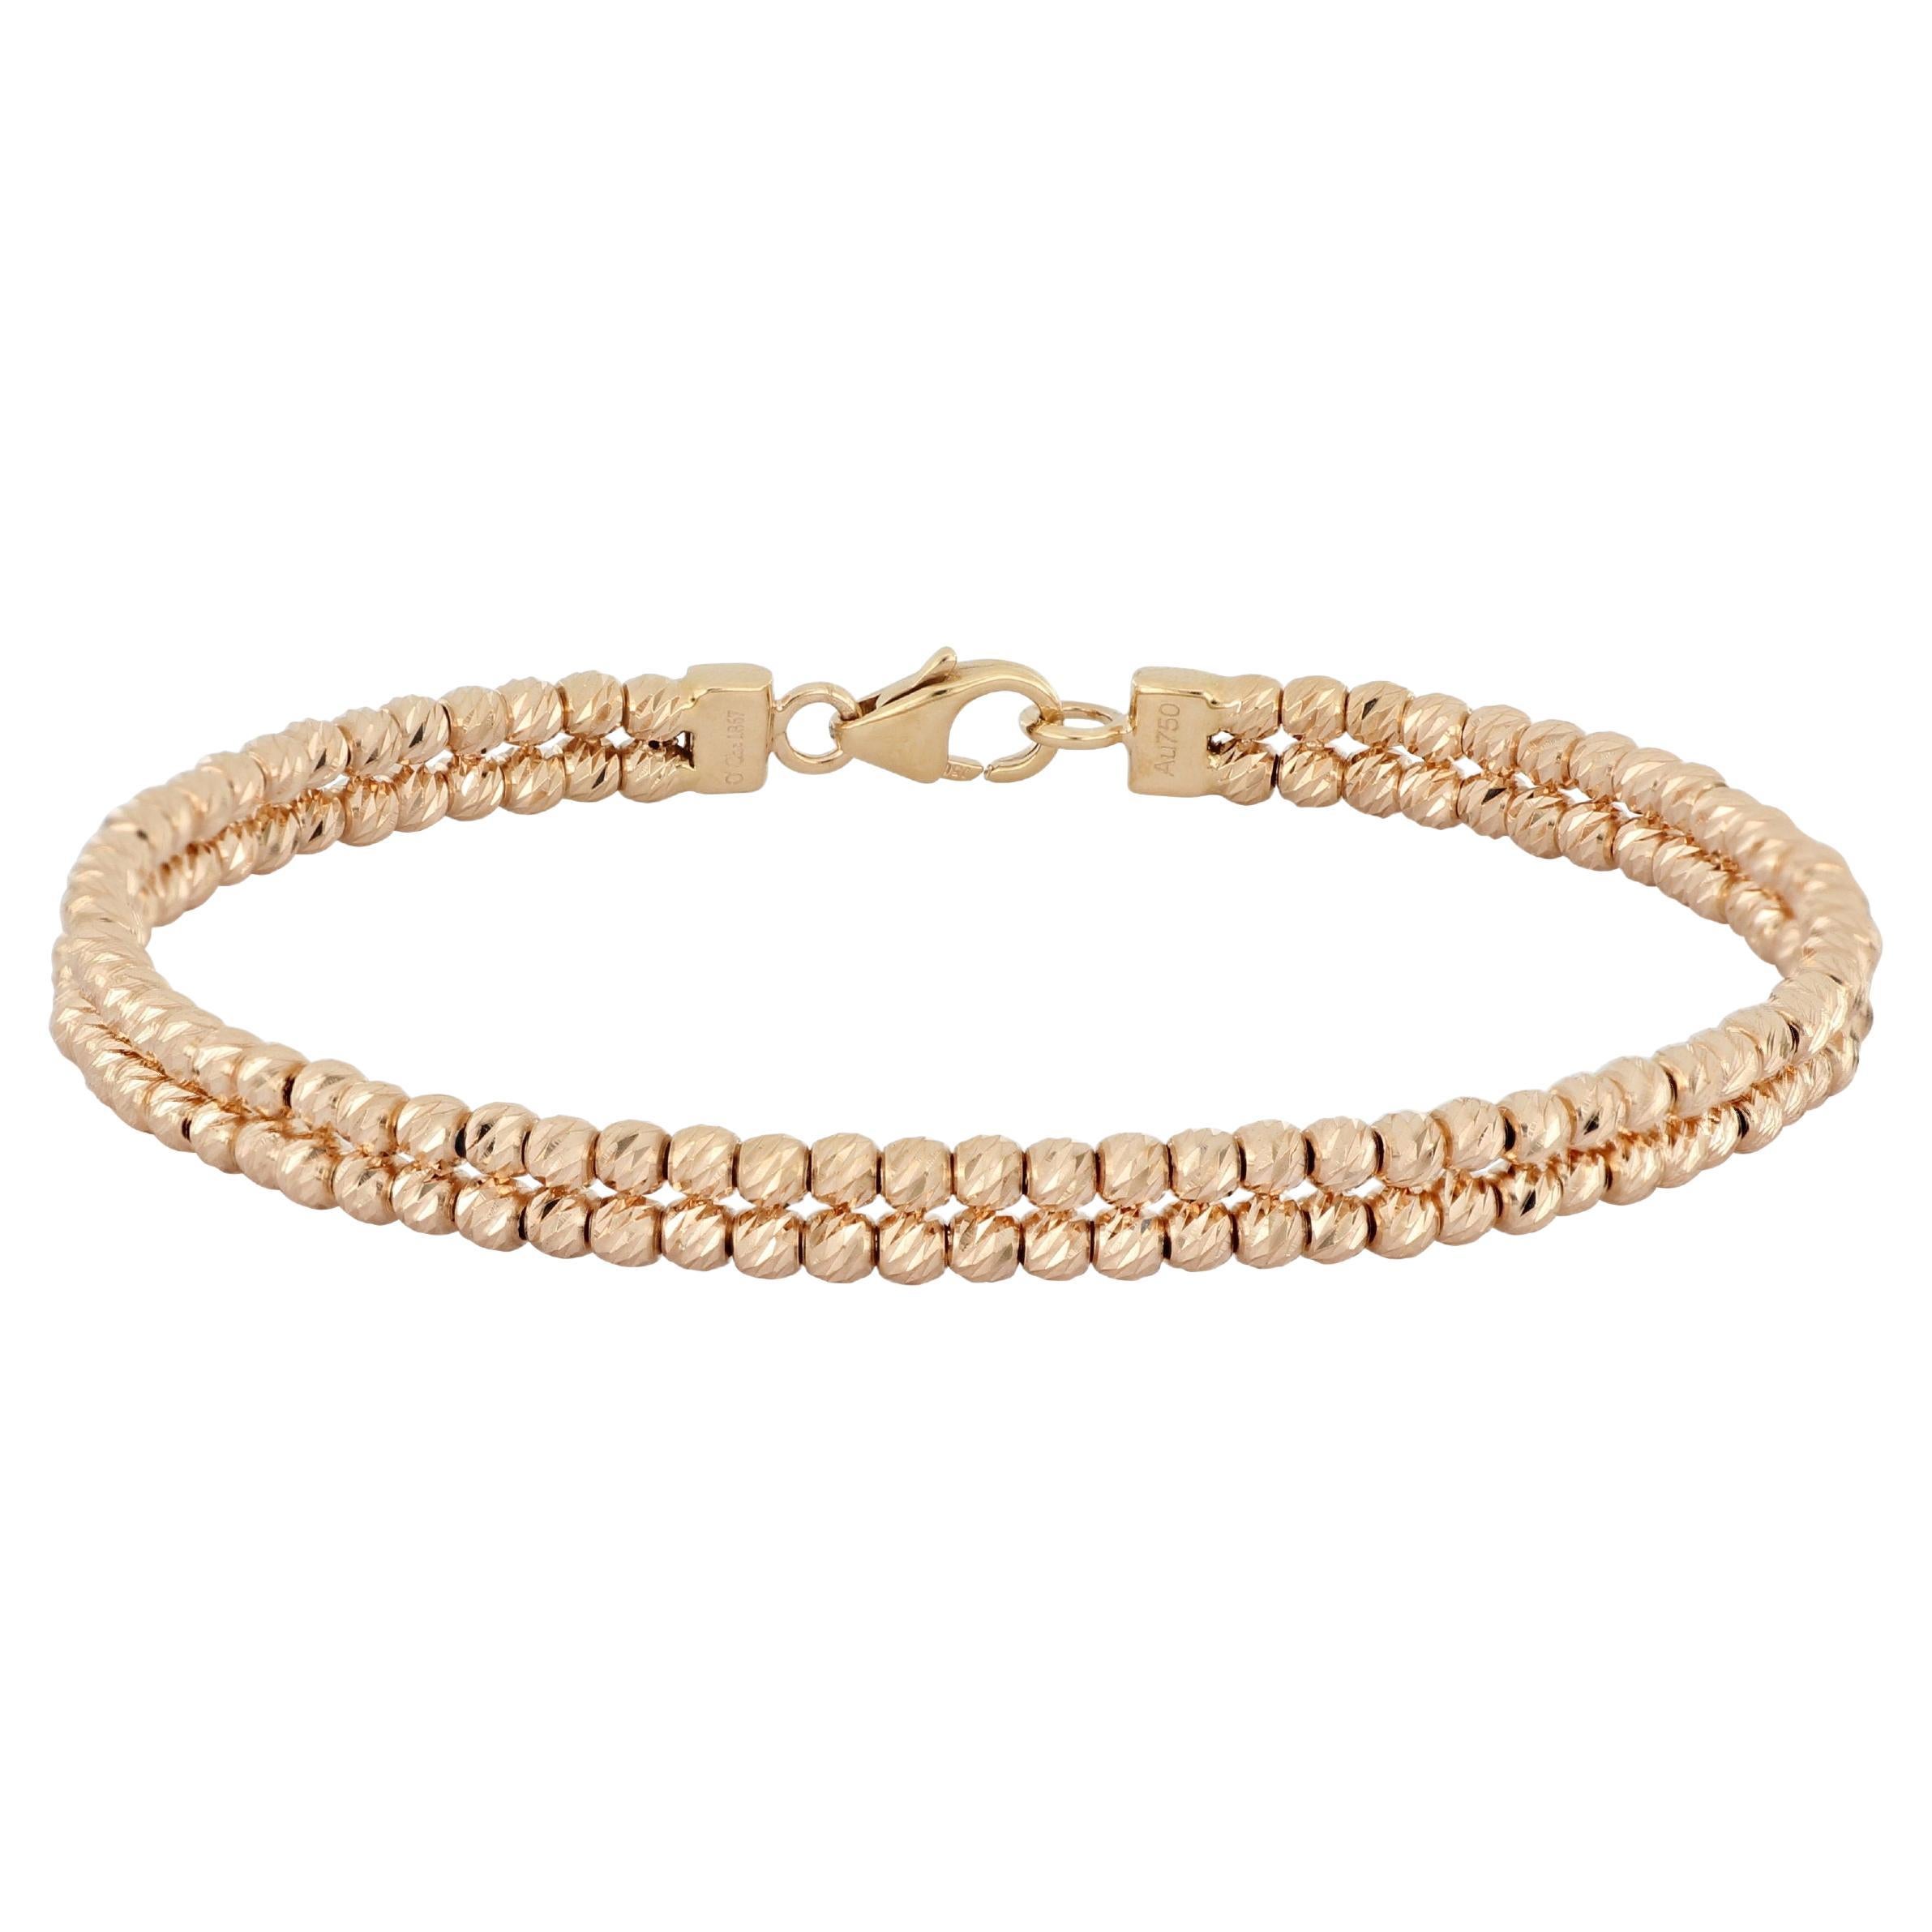 18 Karat Rose Gold Bangle with Sparkling Diamond-cut Beads For Sale